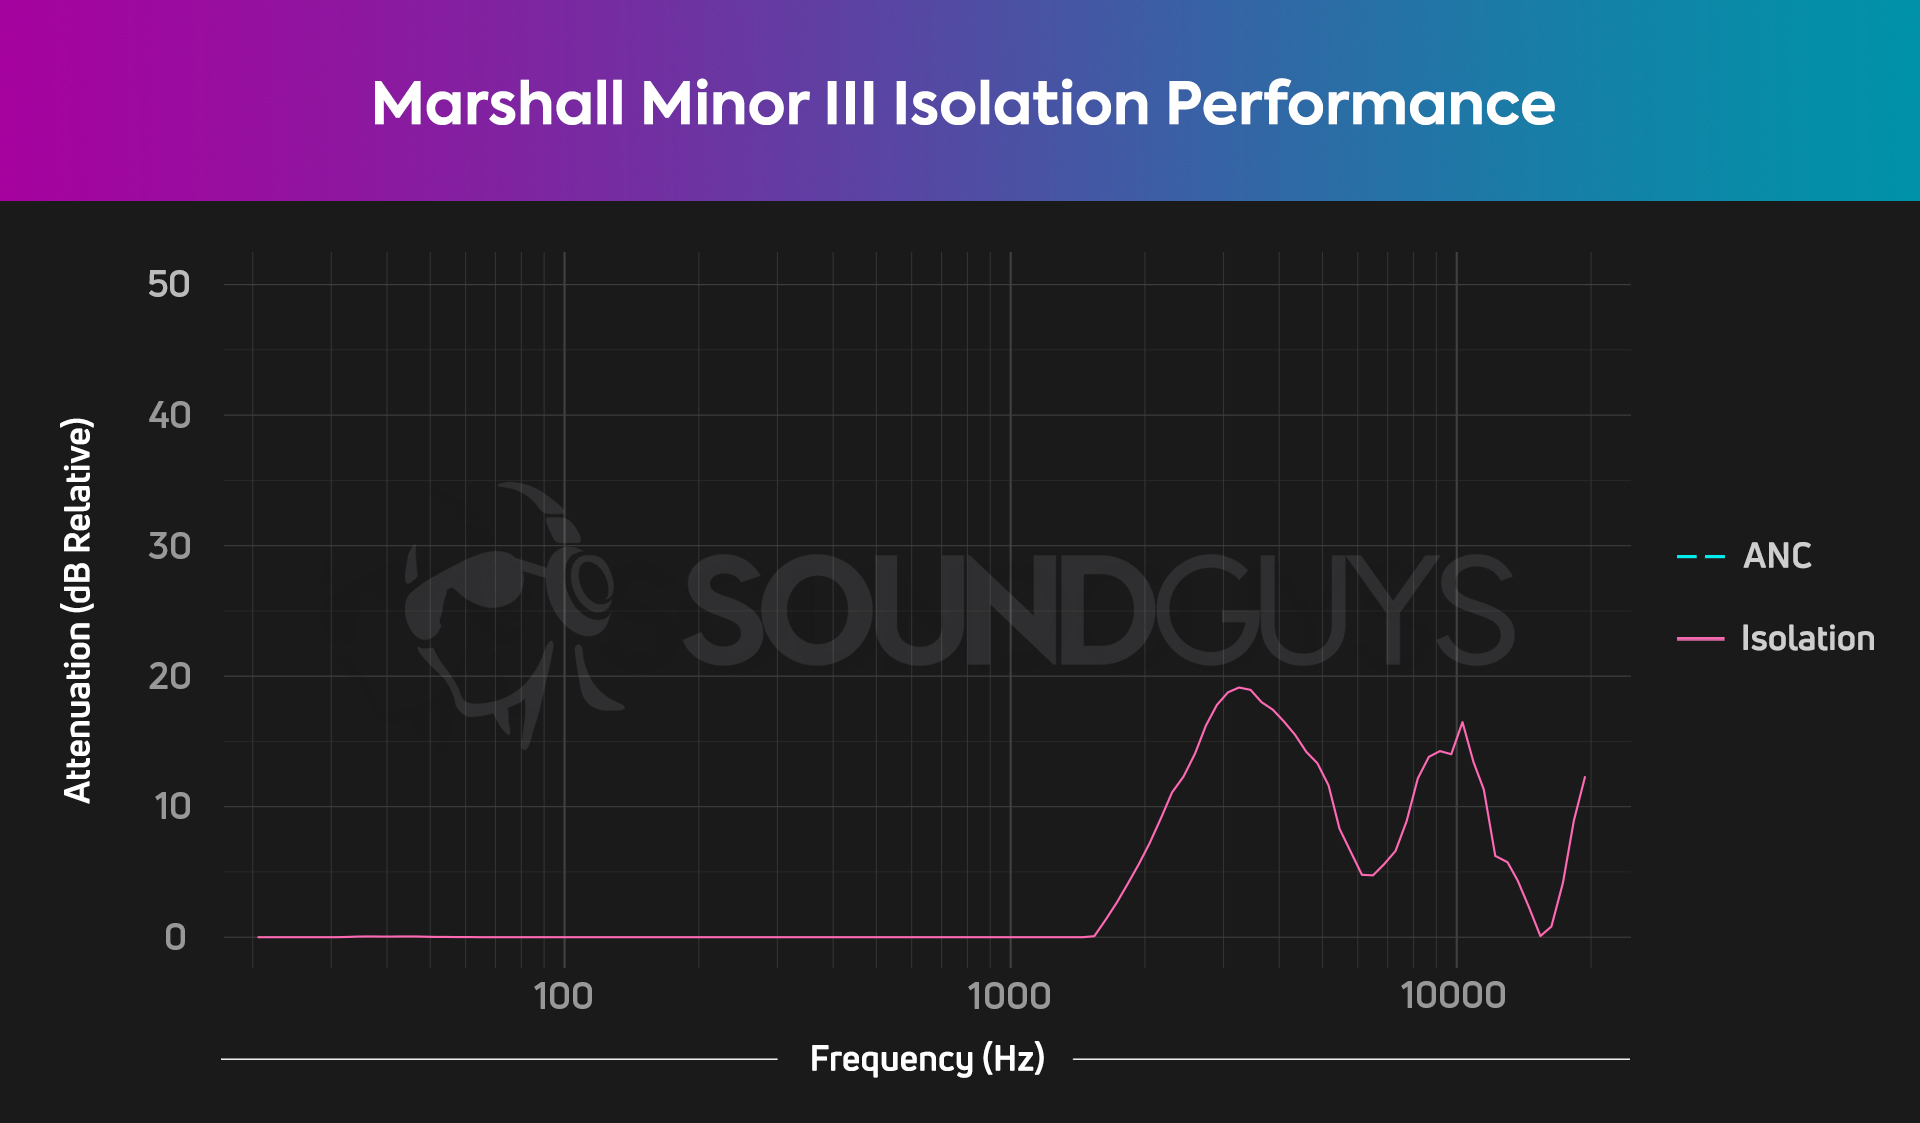 Chart showing the isolation performance of the Marshall Minor III.